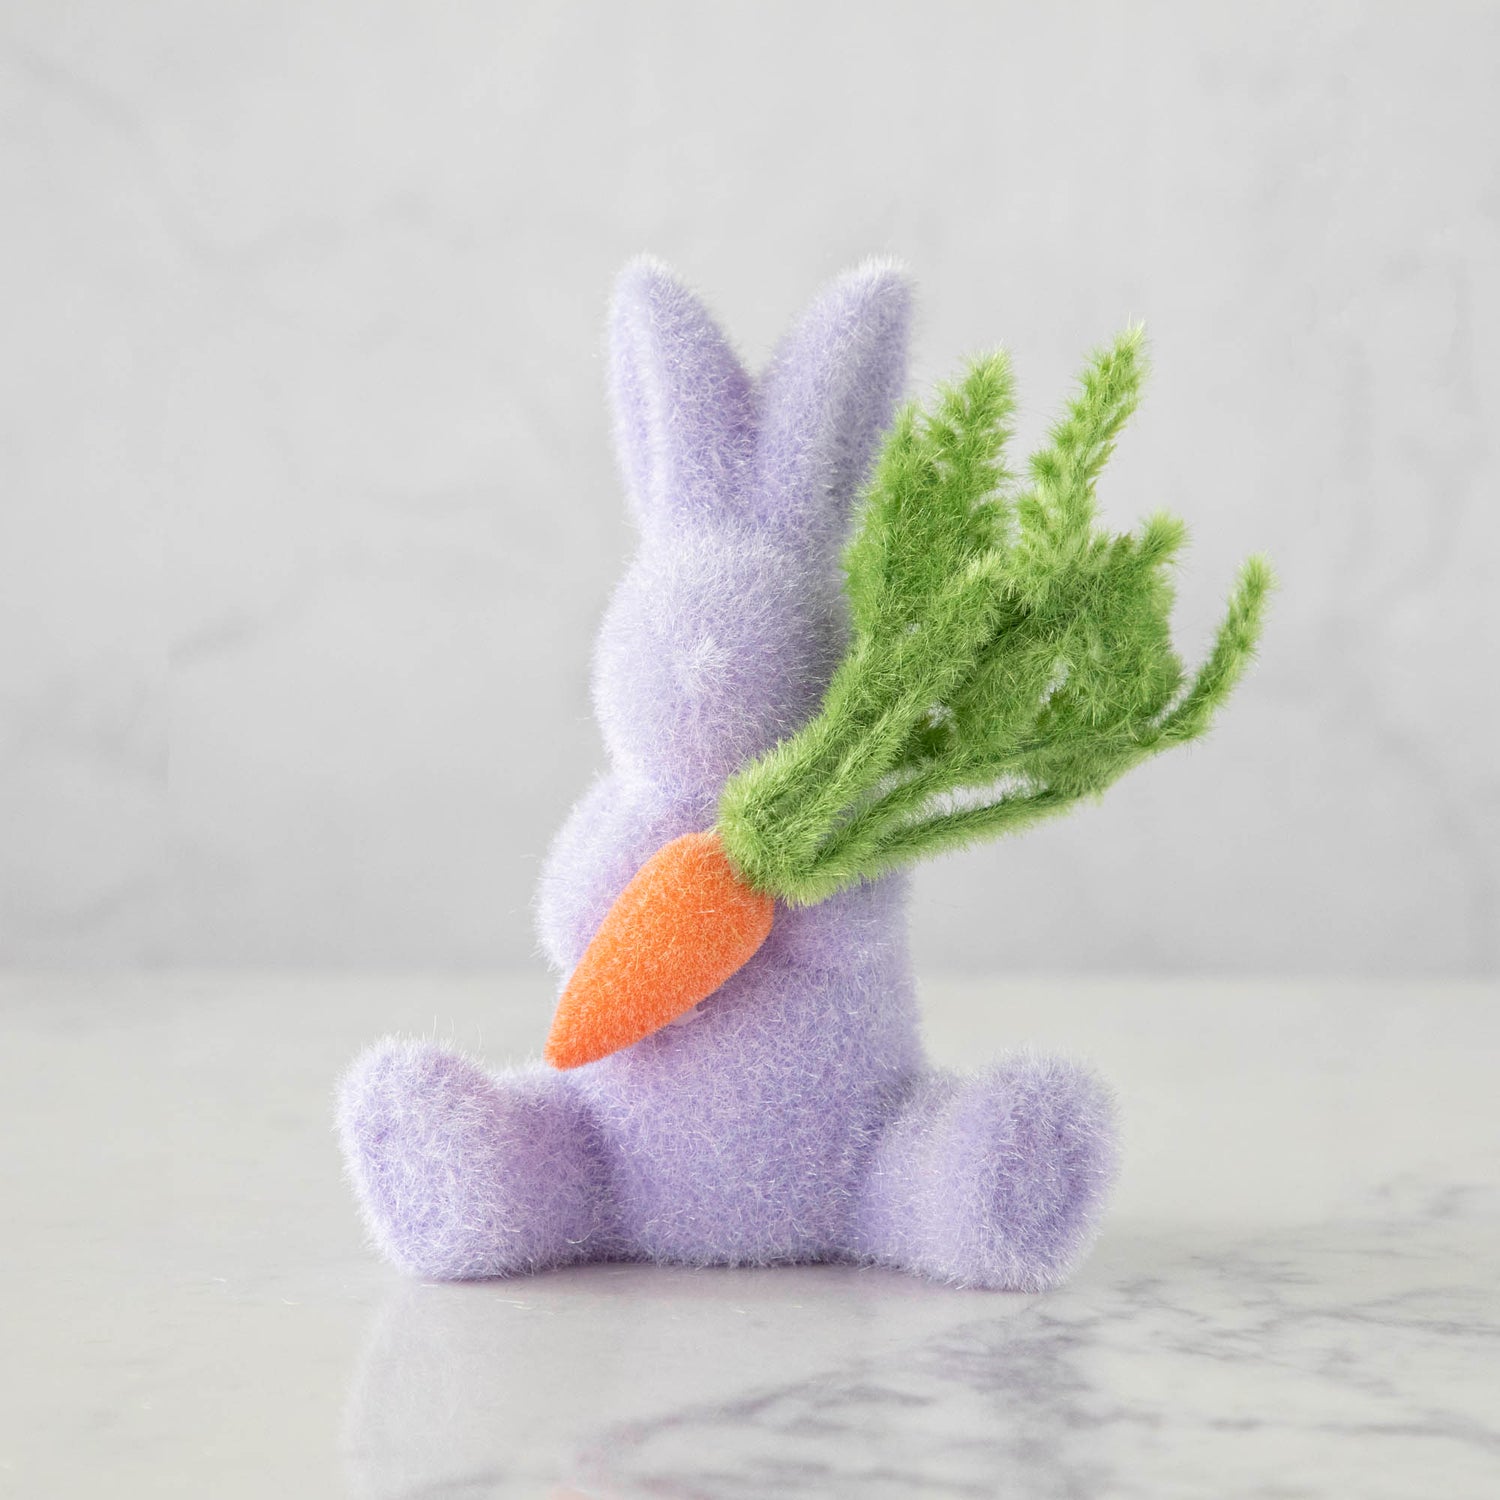 A Glitterville flocked bunny holding a carrot on a table, representing Easter and the arrival of spring.